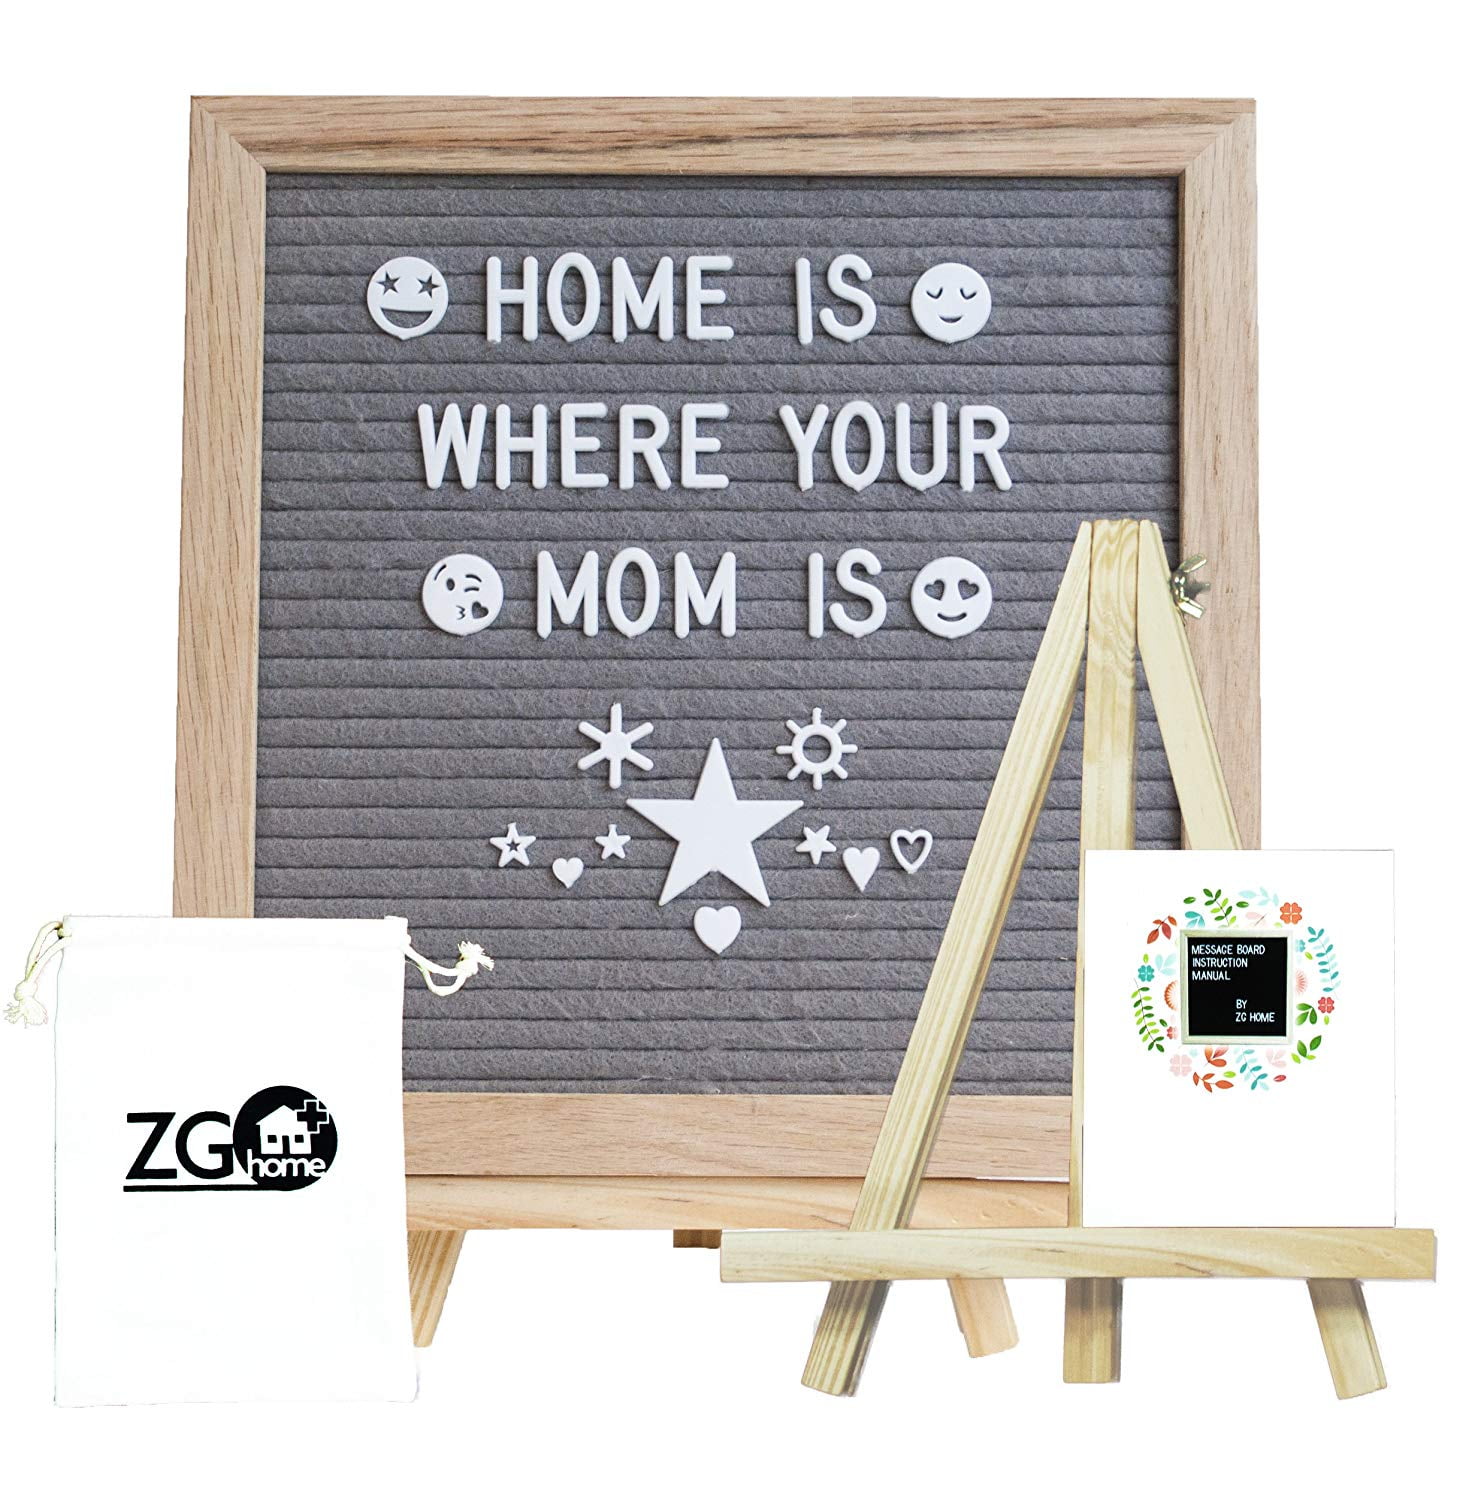 Felt Letter Board 10x10 Inches with 346 PCS 3/4 Inch Changeable Felt Board White Plastic Letters in Drawstring Cotton Bag Black Wood Oak Frame and Soft Felt Letters Board Metal Hook.